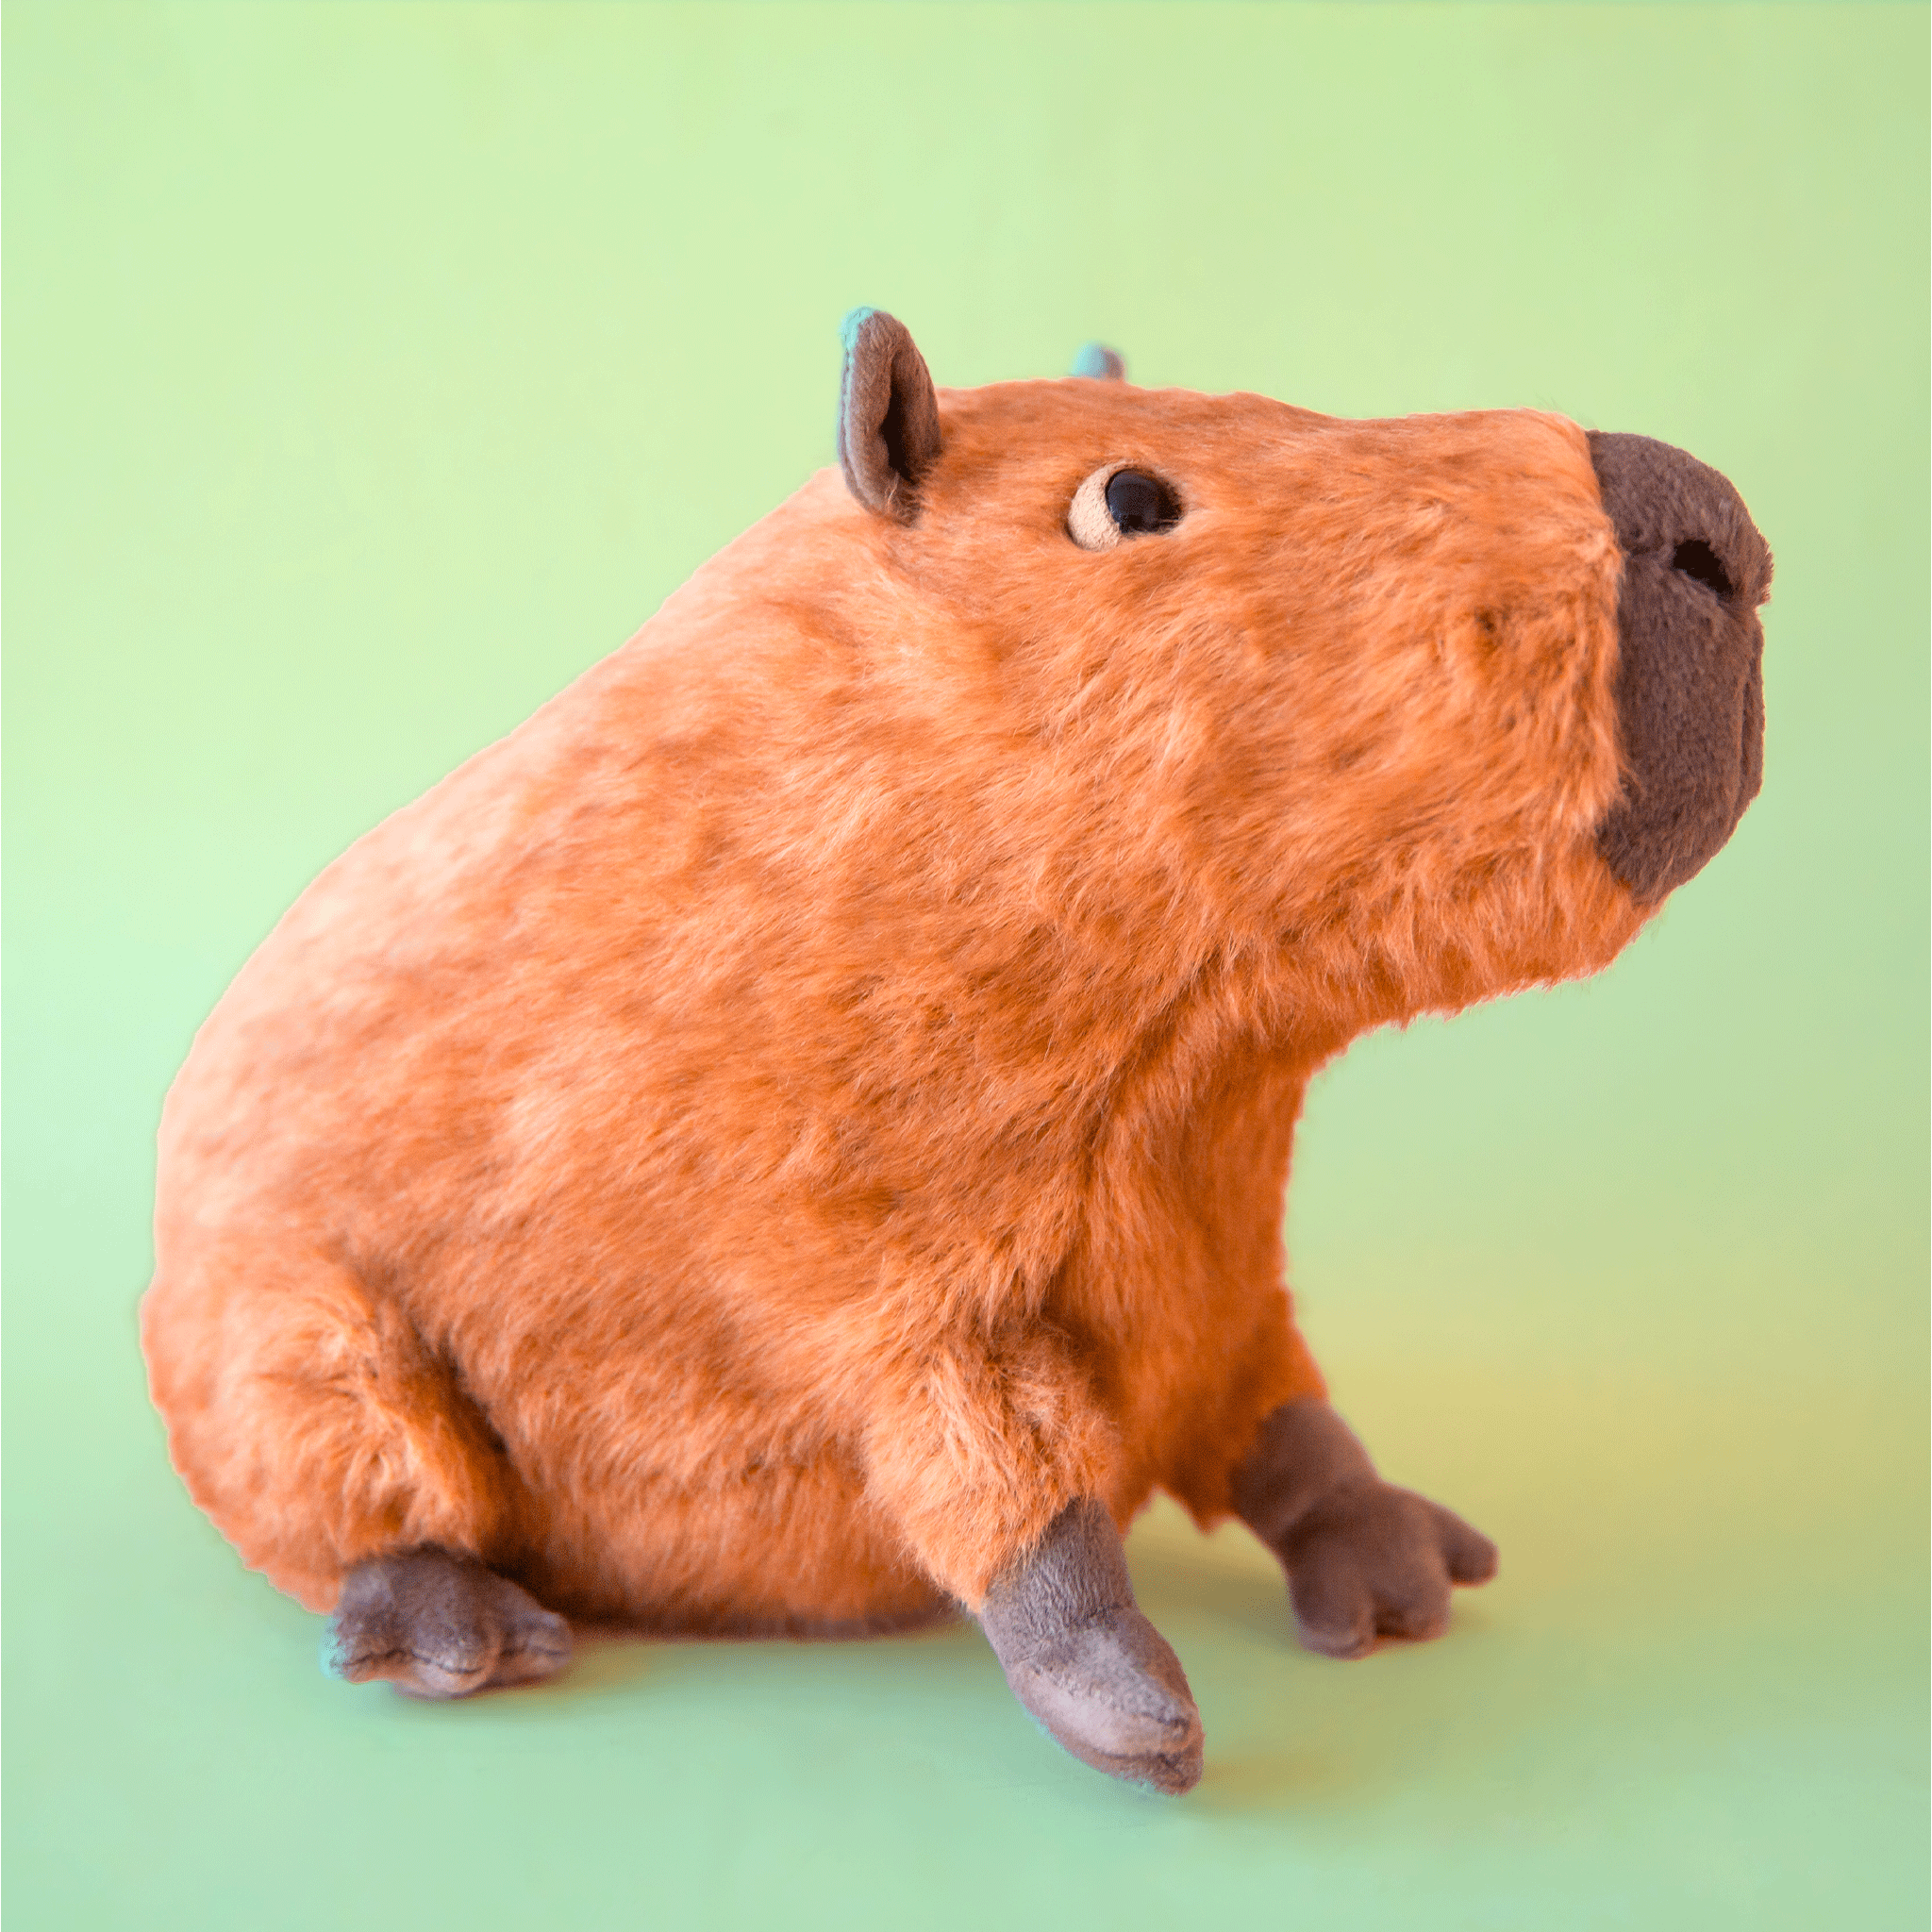 On a green background is a brown capybara shaped stuffed animal toy. 